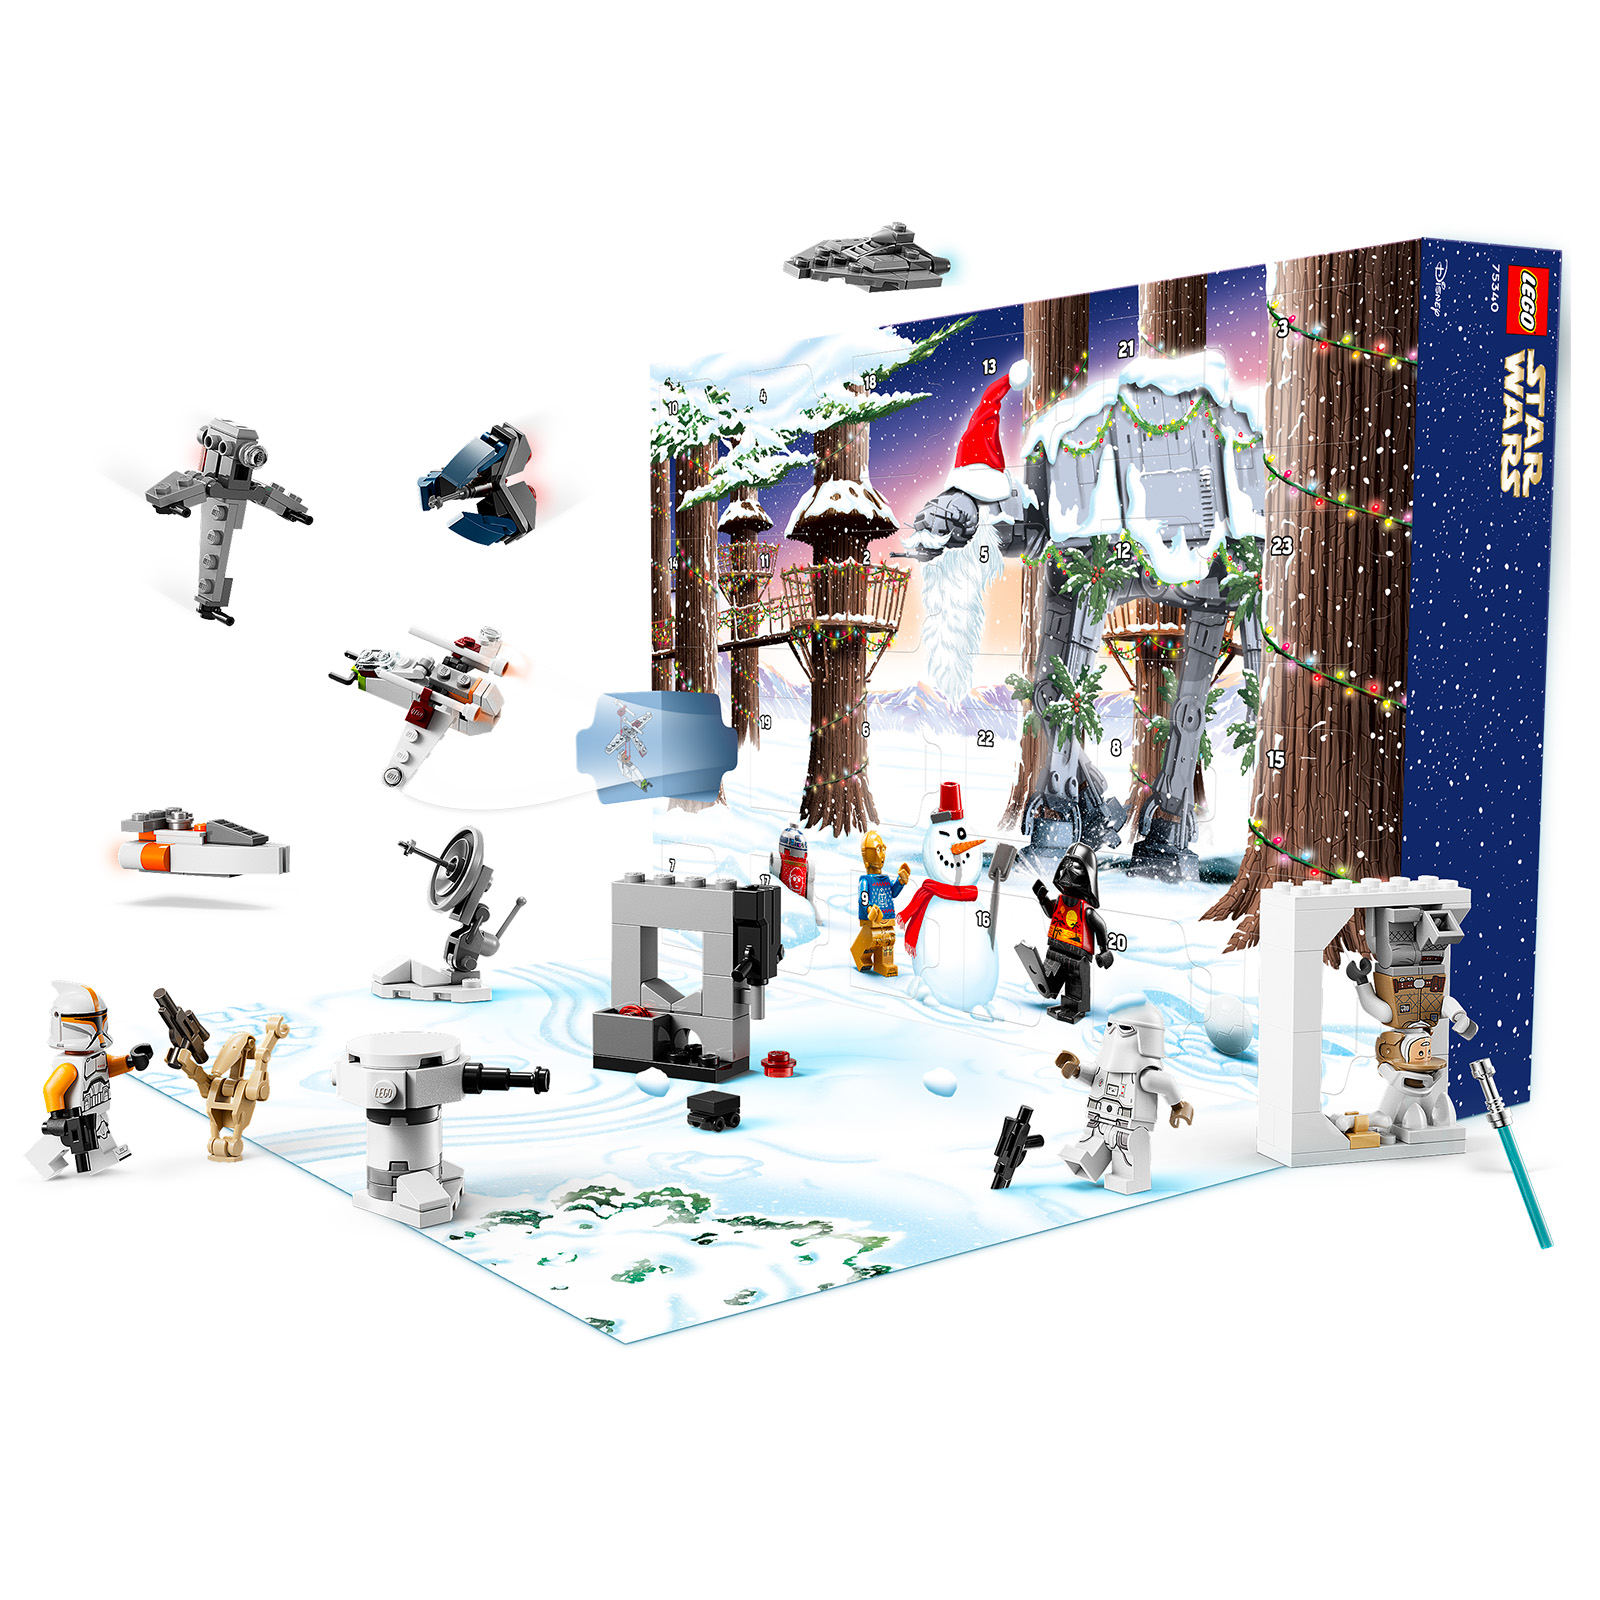 LEGO Star Wars 75340 Advent Calendar 2022: The set is online on the Shop